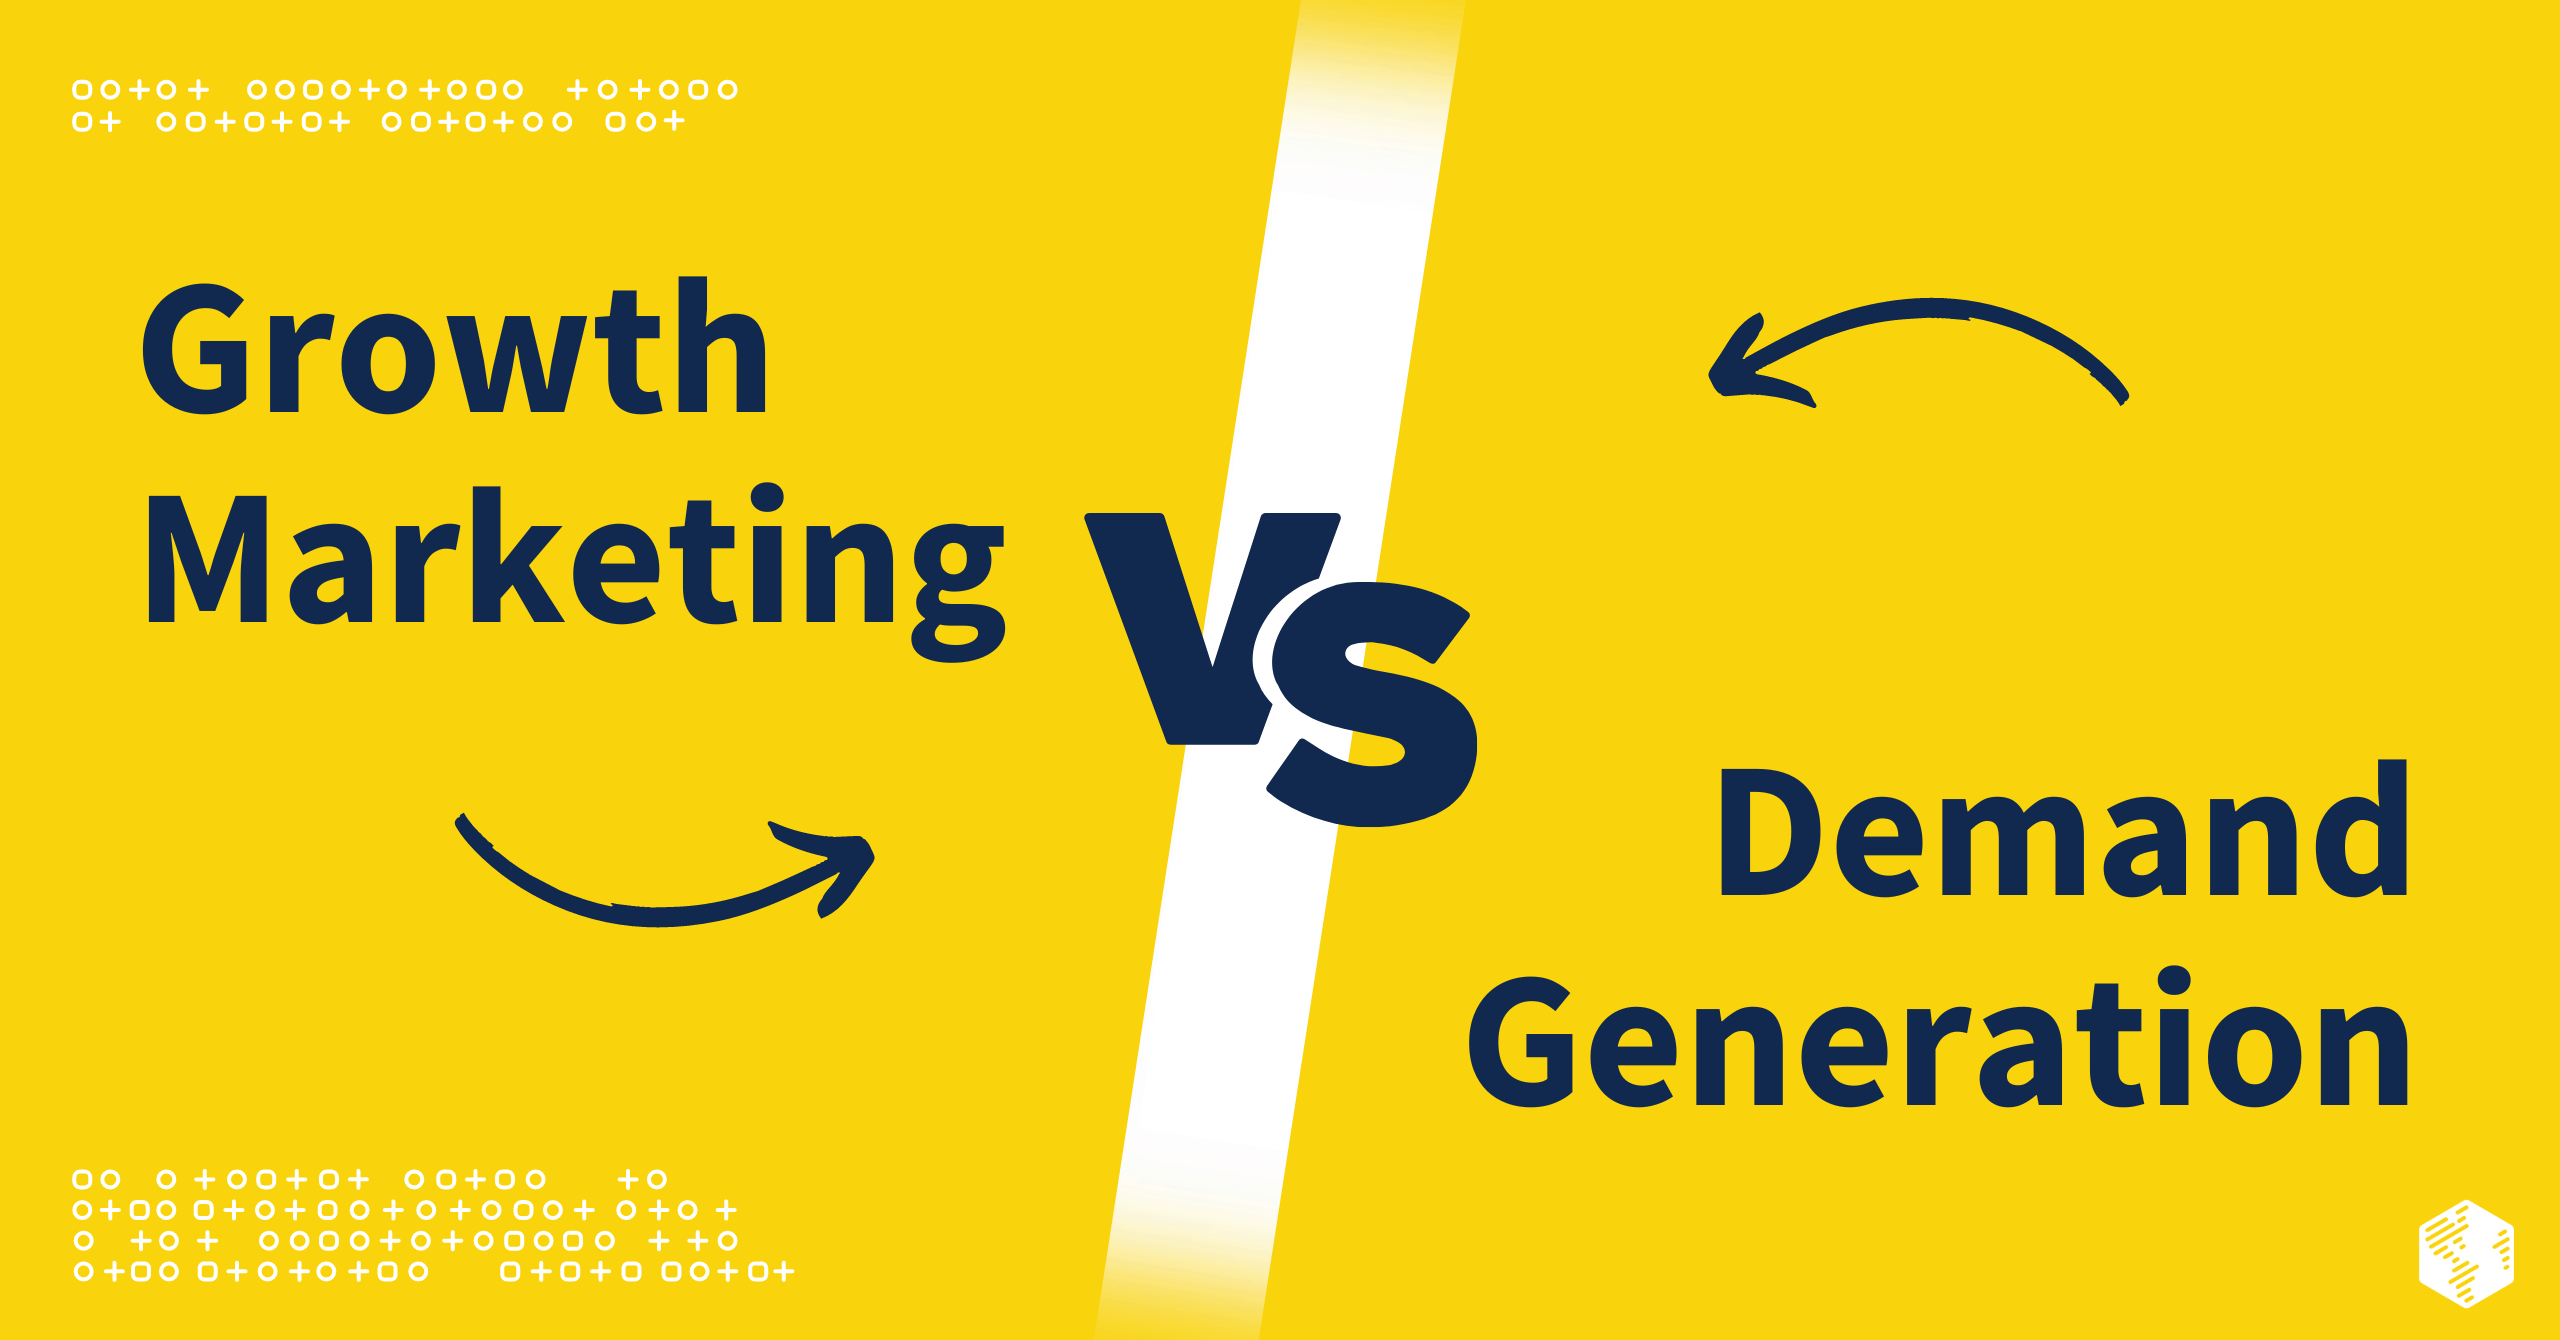 Growth Marketing vs. Demand Generation: Which Is Best for Your B2B Business?